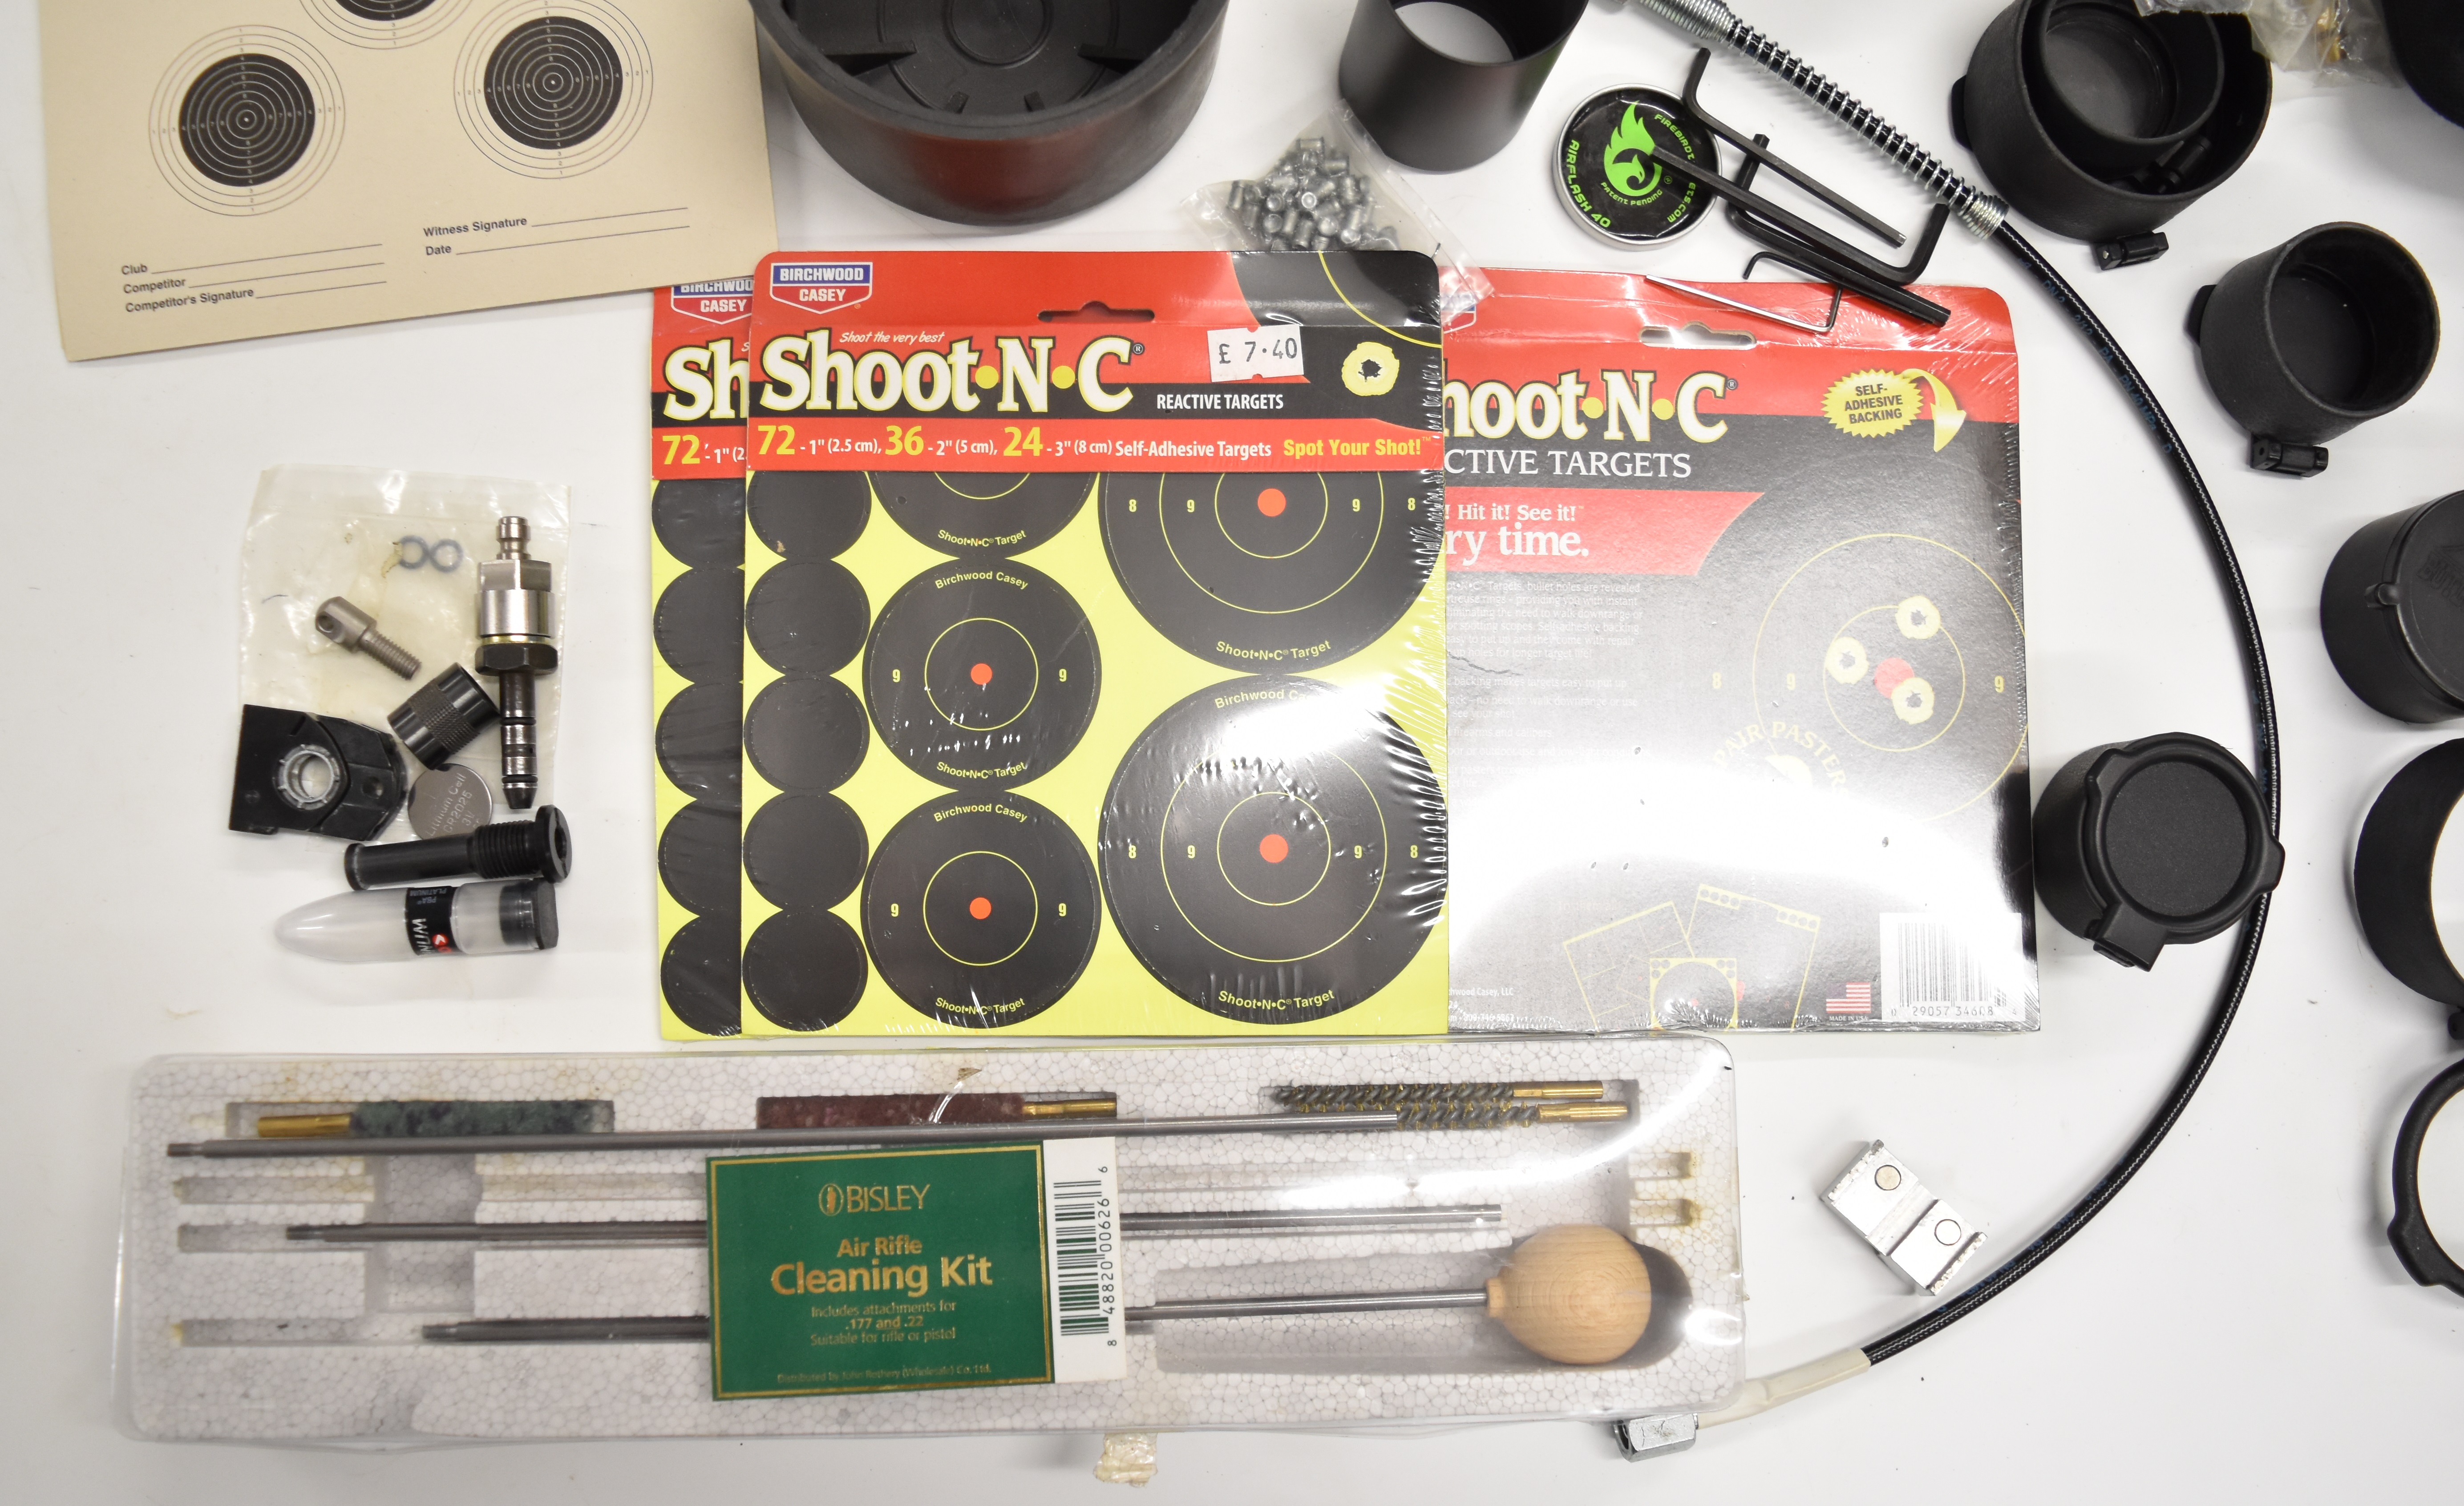 A collection of air rifle, pistol and gun parts and accessories including cleaning kits, pellets, - Image 5 of 6